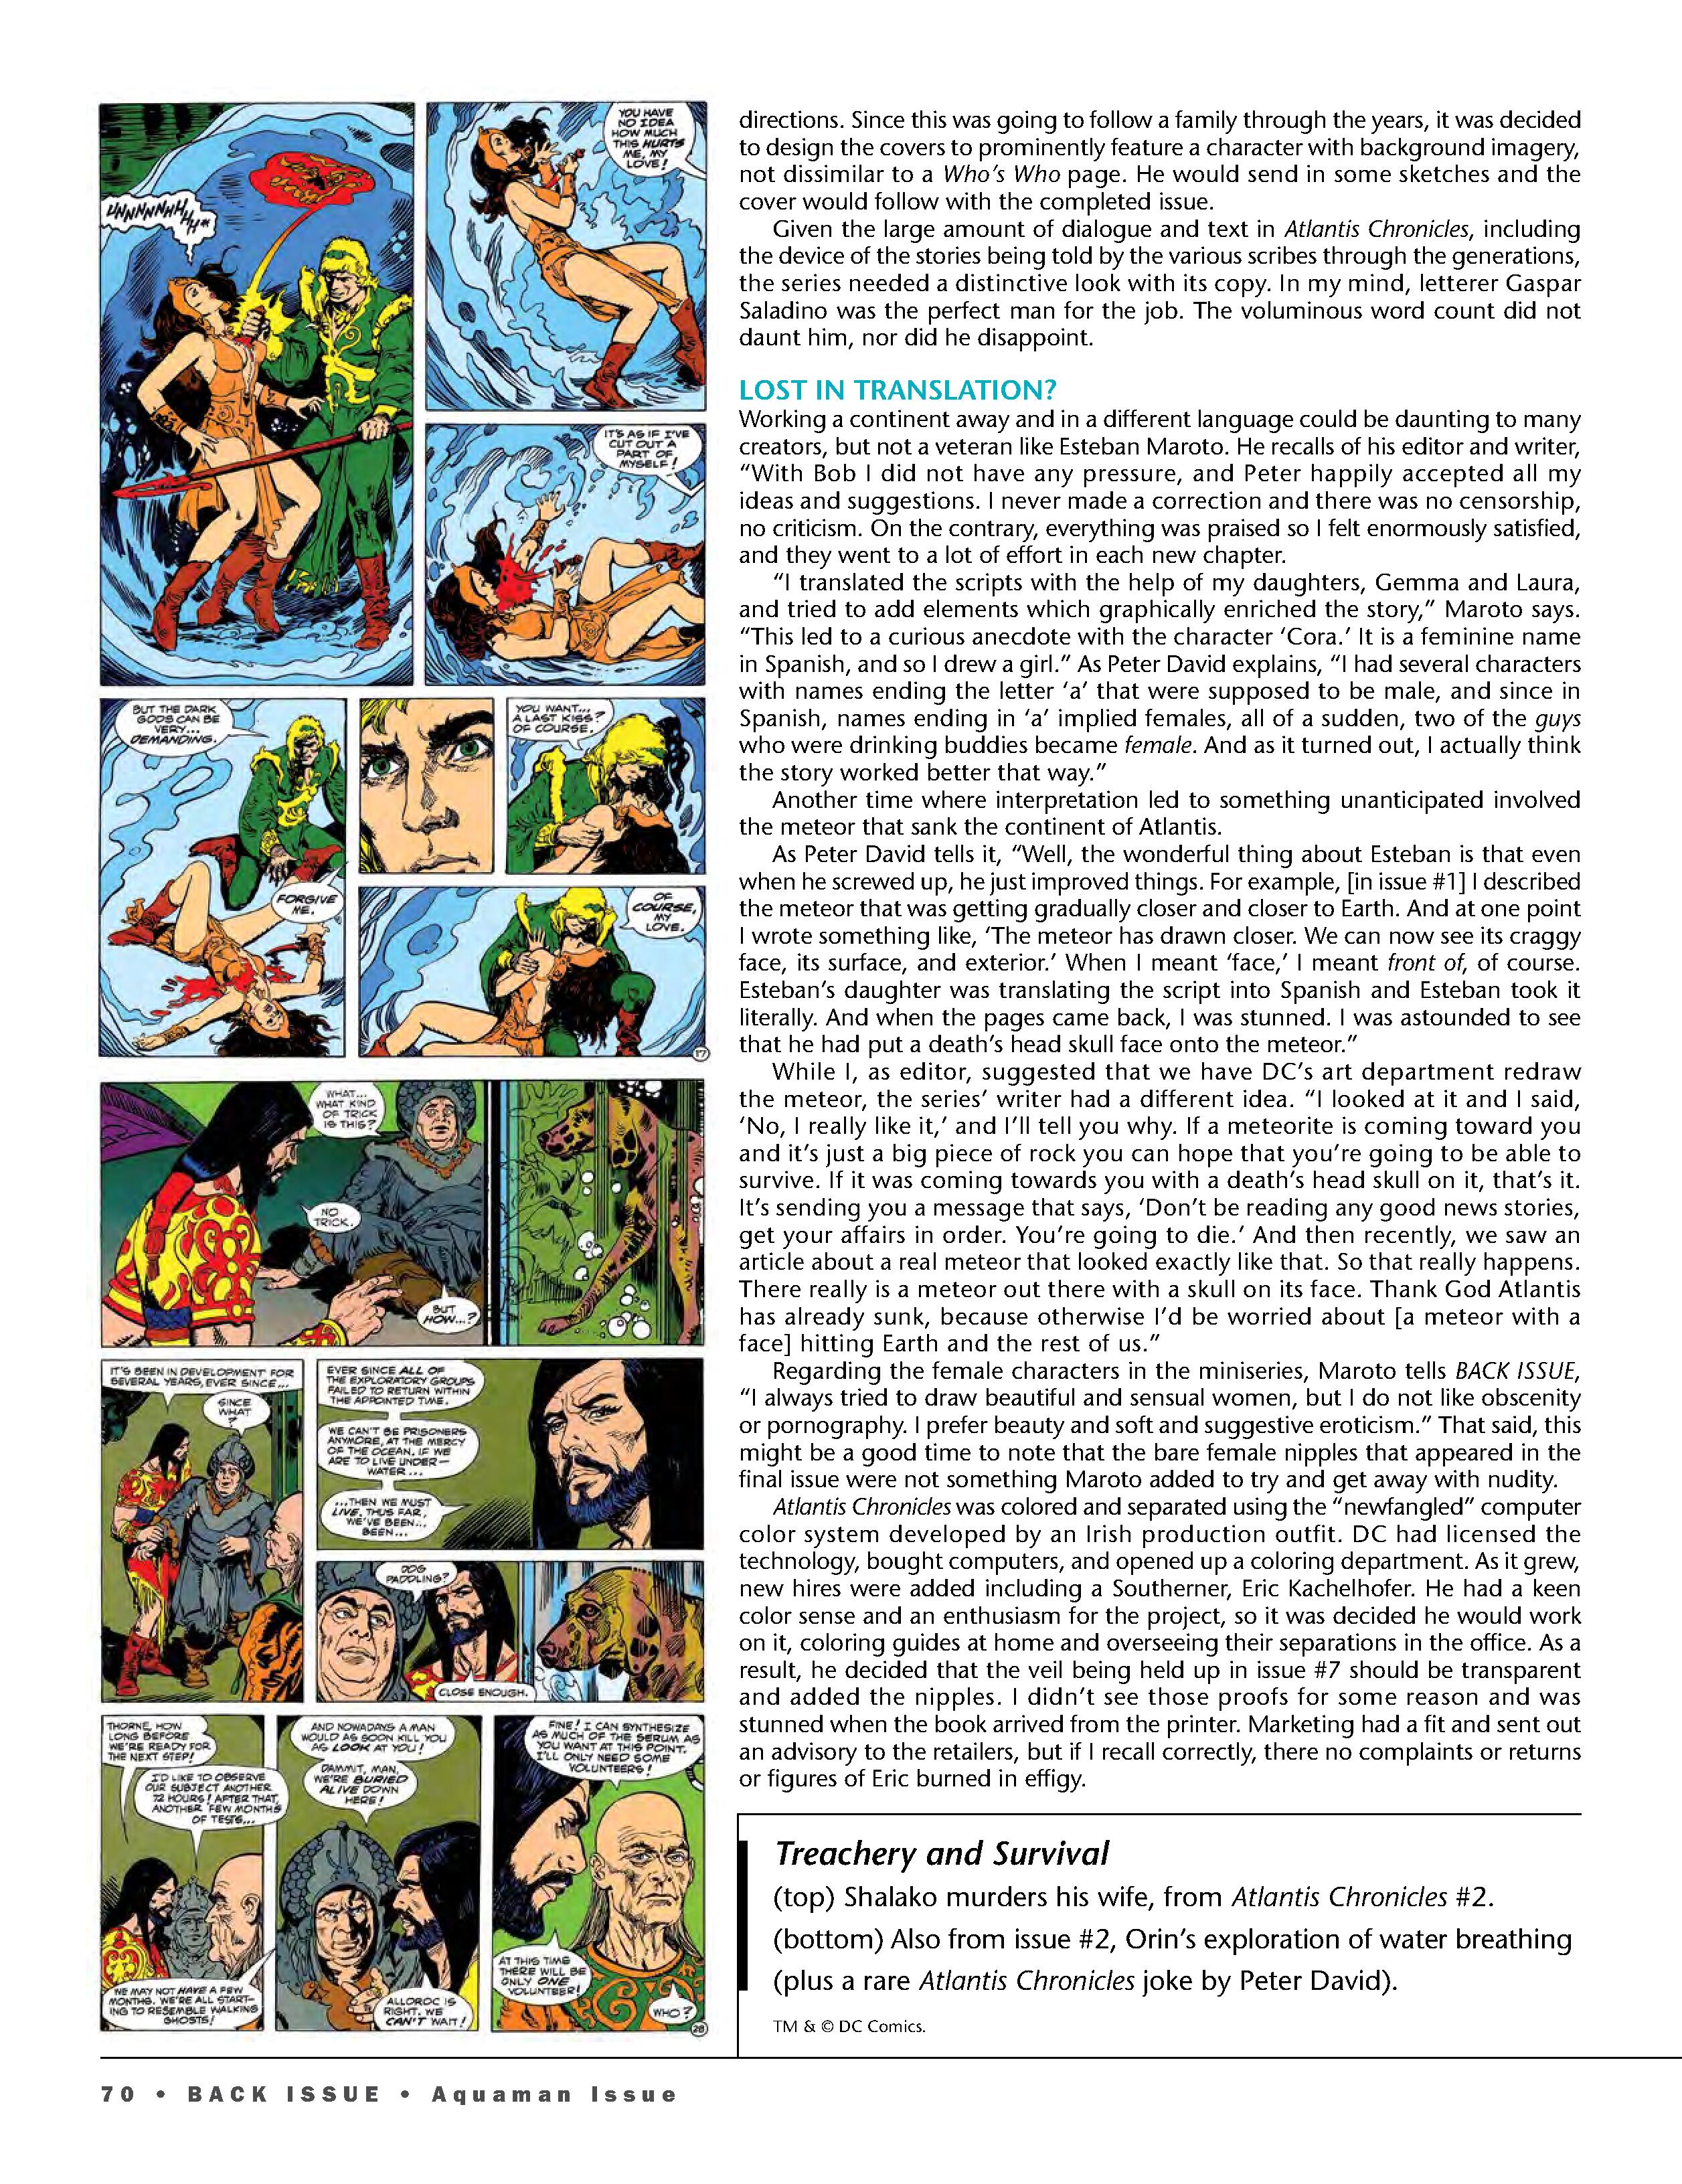 Read online Back Issue comic -  Issue #108 - 72